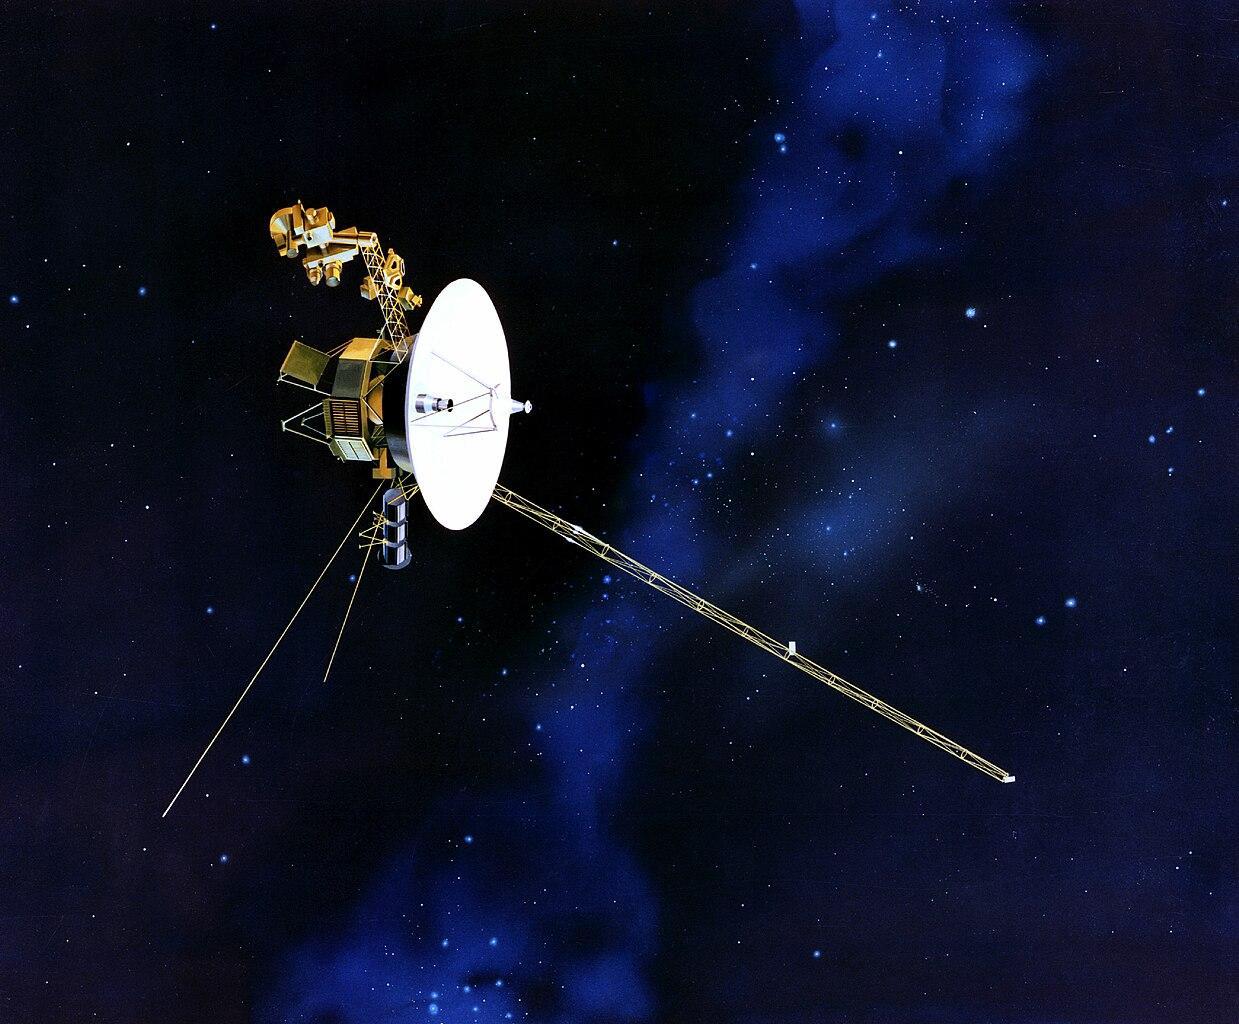 <p>The Voyager probes far exceeded NASA's initial expectations, revealing surprising and fascinating aspects of our solar system. Reflecting on the mission, Cummings shared that while it didn’t all go according to plan in the beginning, the unexpected discoveries made it all the more exciting.  </p> <p>“The biggest problem was getting it past the launchpad,” the physicist <a href="https://mashable.com/article/nasa-voyager-mission">said</a>, referring to a number of failed launches. “A lot of us had a goal of getting to interstellar space.”     </p>